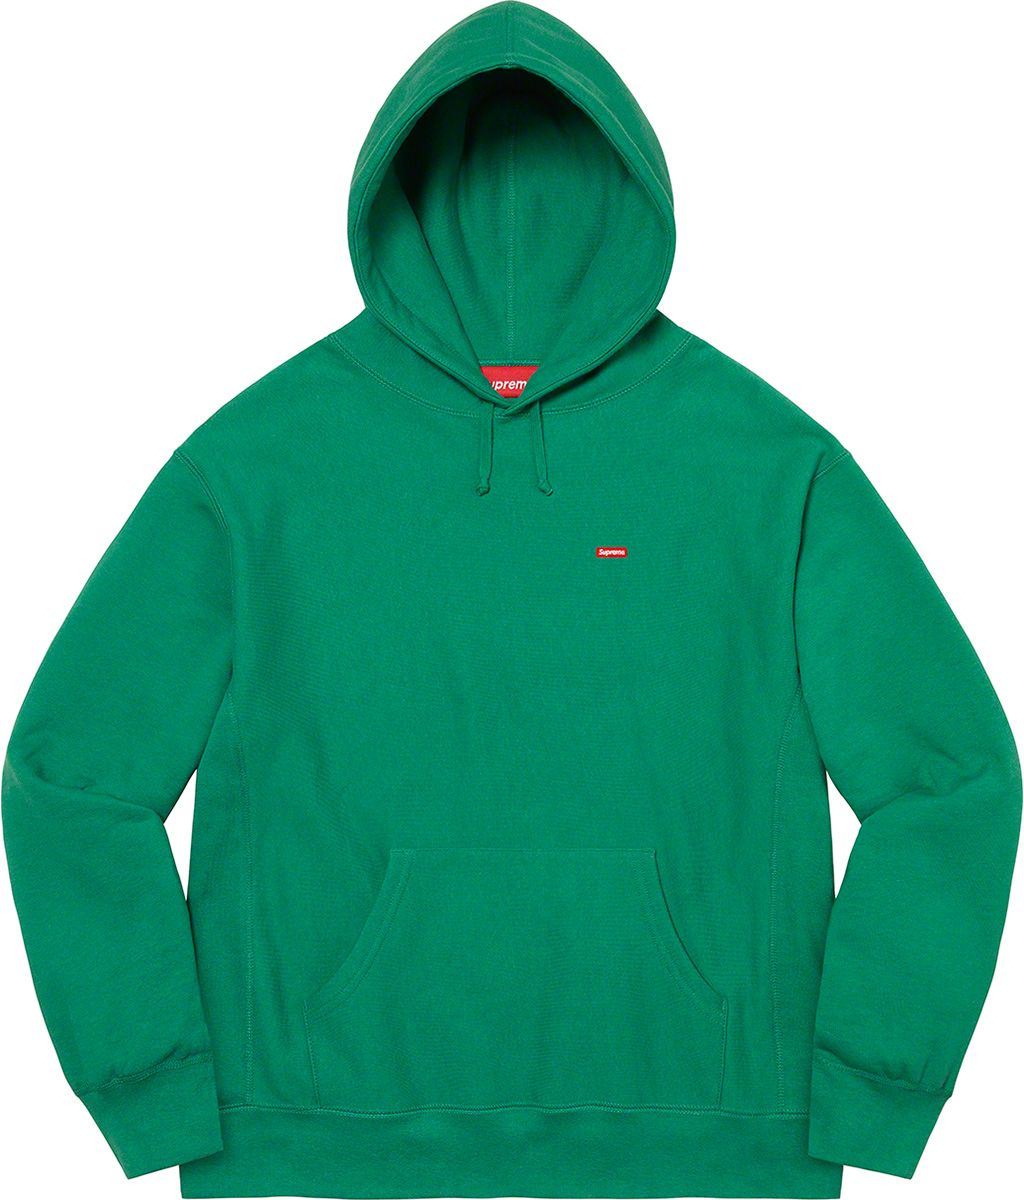 Reflective Hooded Sweatshirt - Fall/Winter 2021 Preview – Supreme